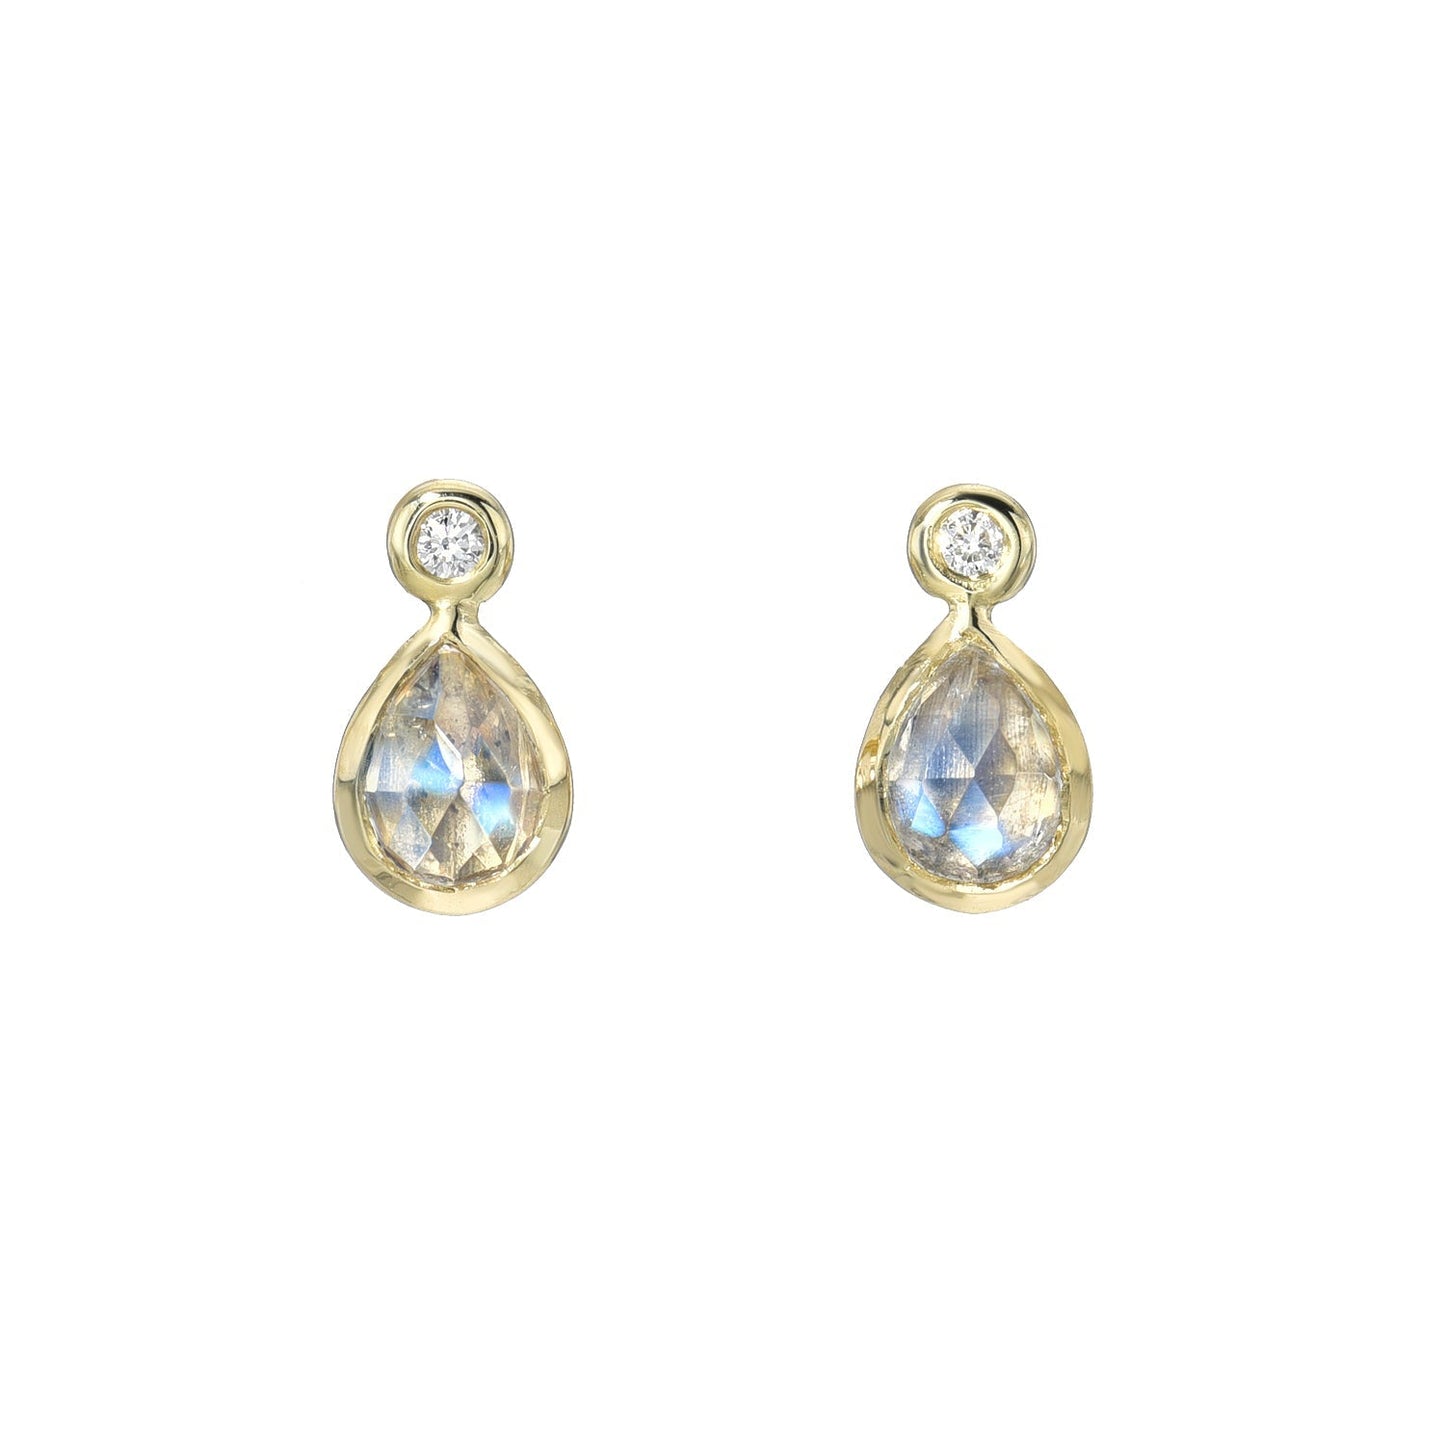 Moonstone Earrings by NIXIN Jewelry in front of a white background. Made in 14k gold with blue moonstone and tiny diamonds.